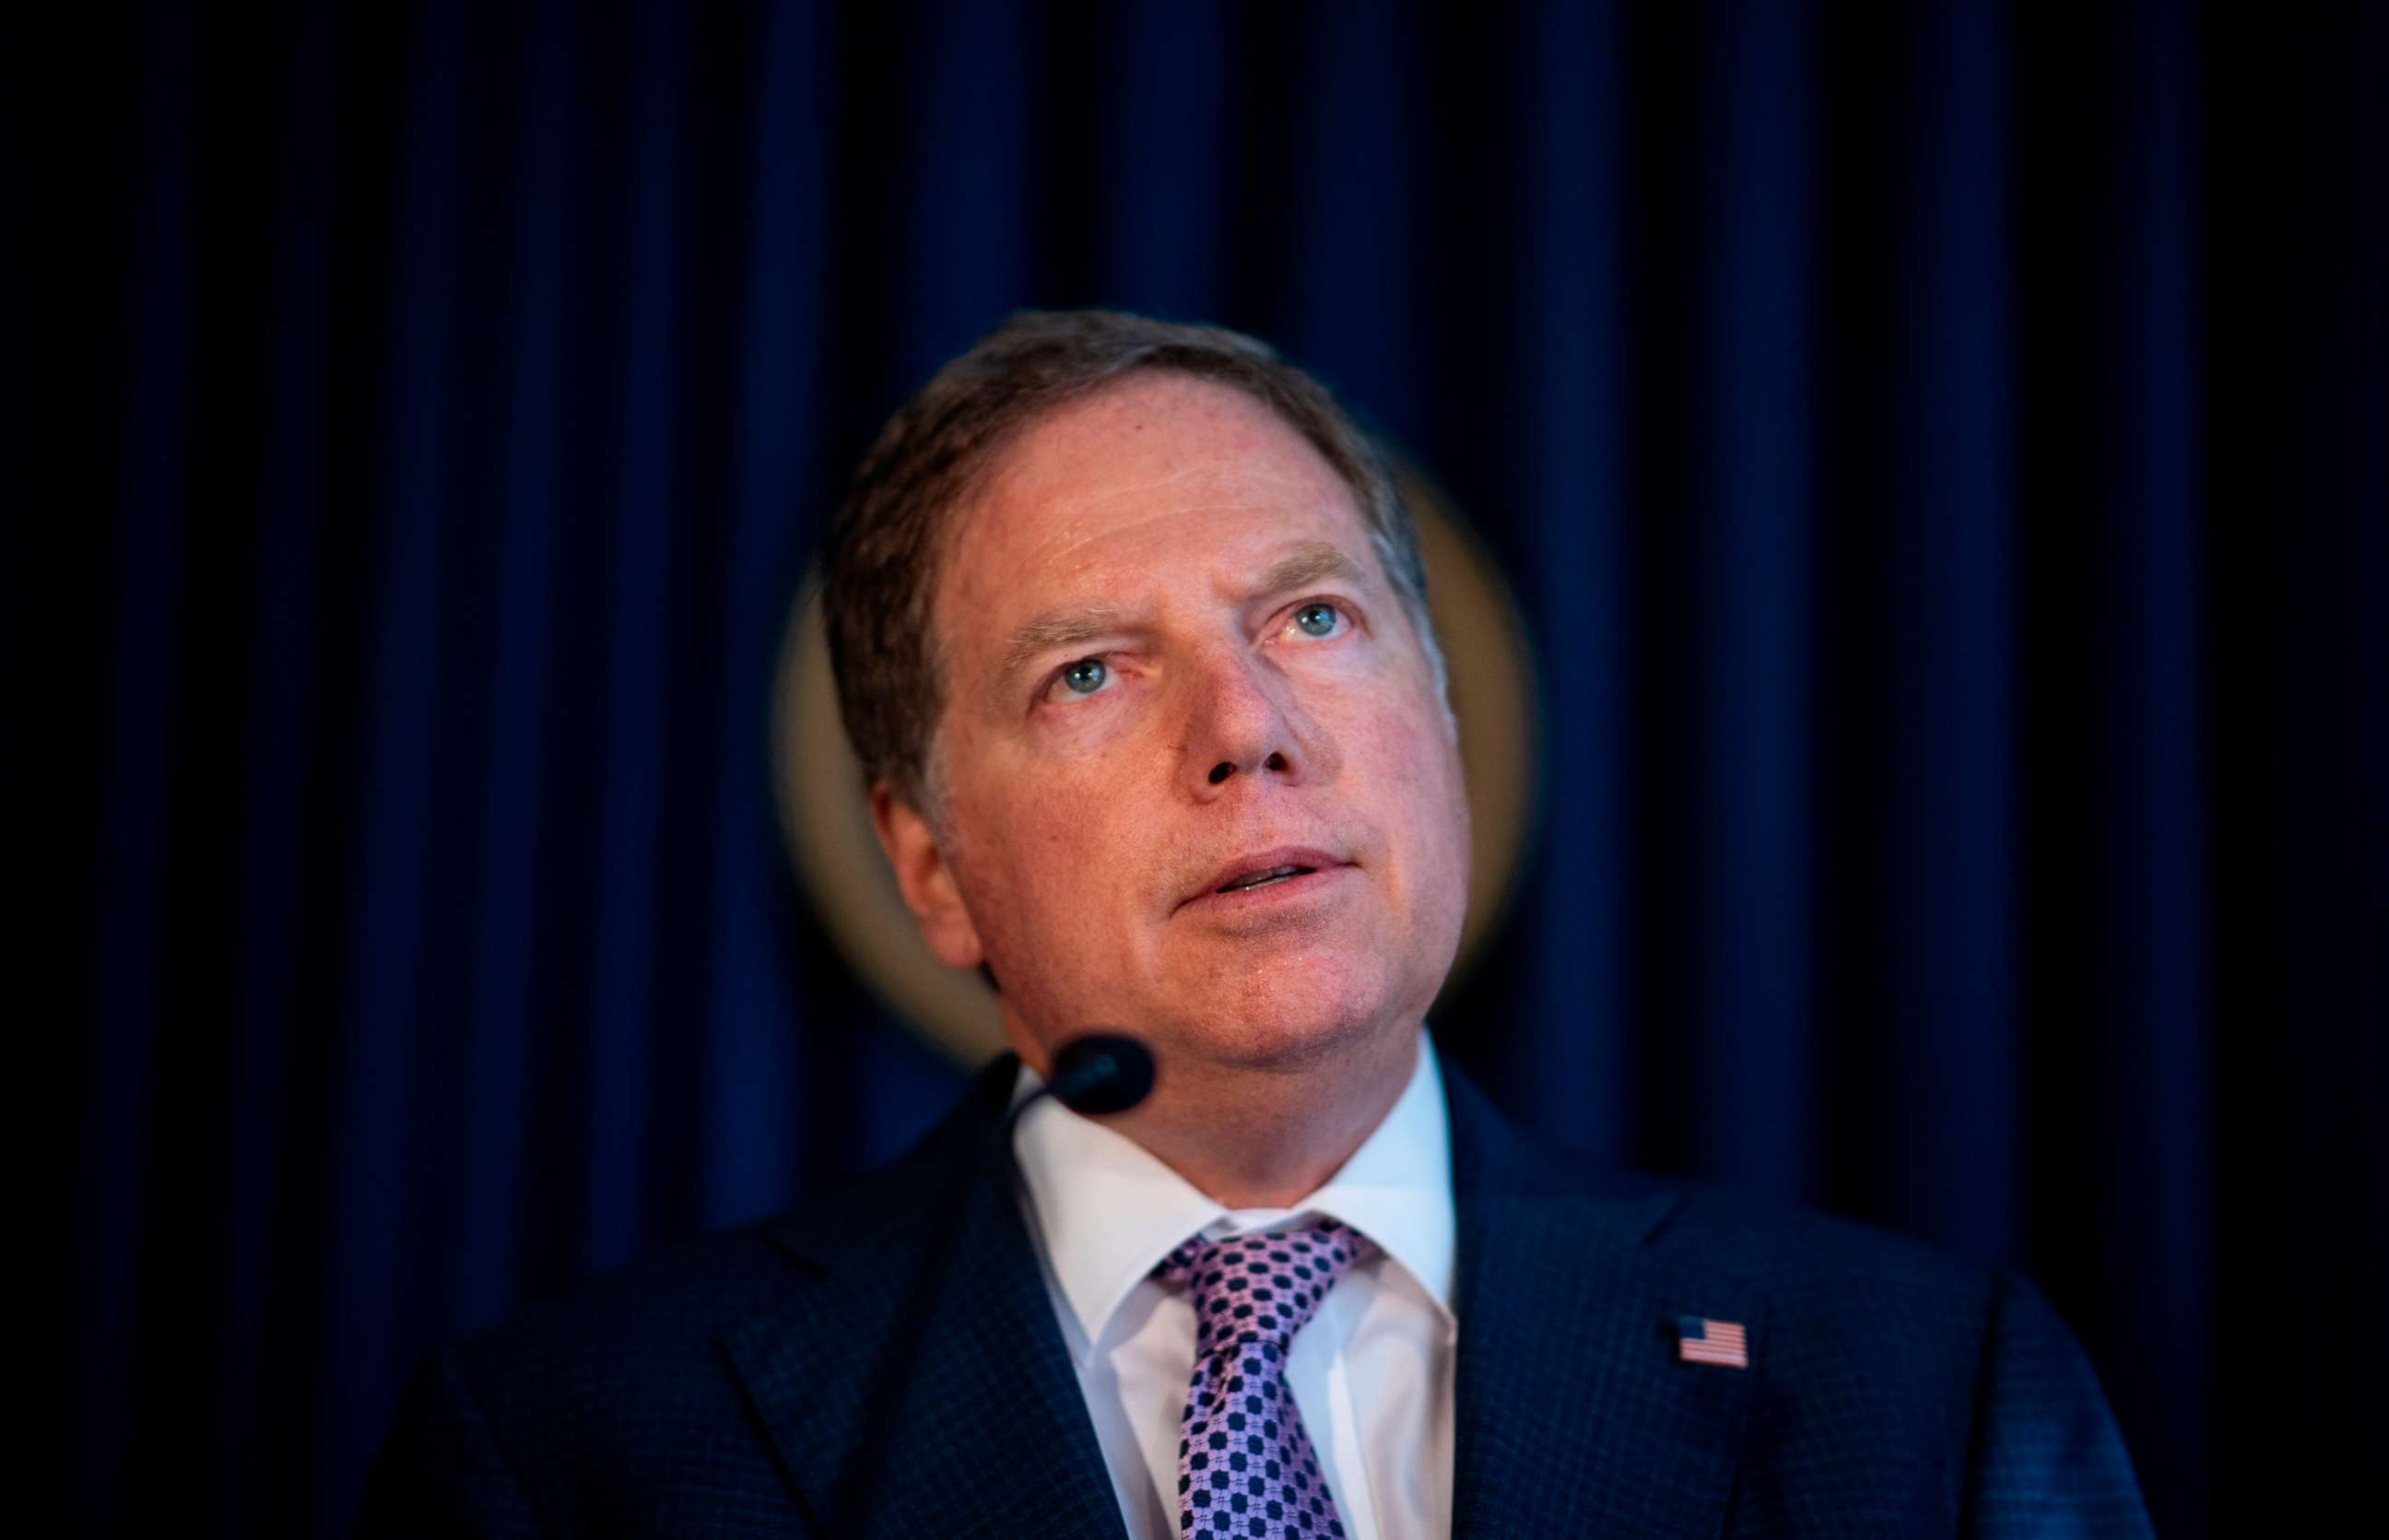 PHOTO: In this file photo taken on Oct. 10, 2019, U.S. Attorney for the Southern District of New York Geoffrey Berman speaks at a press conference in New York City.